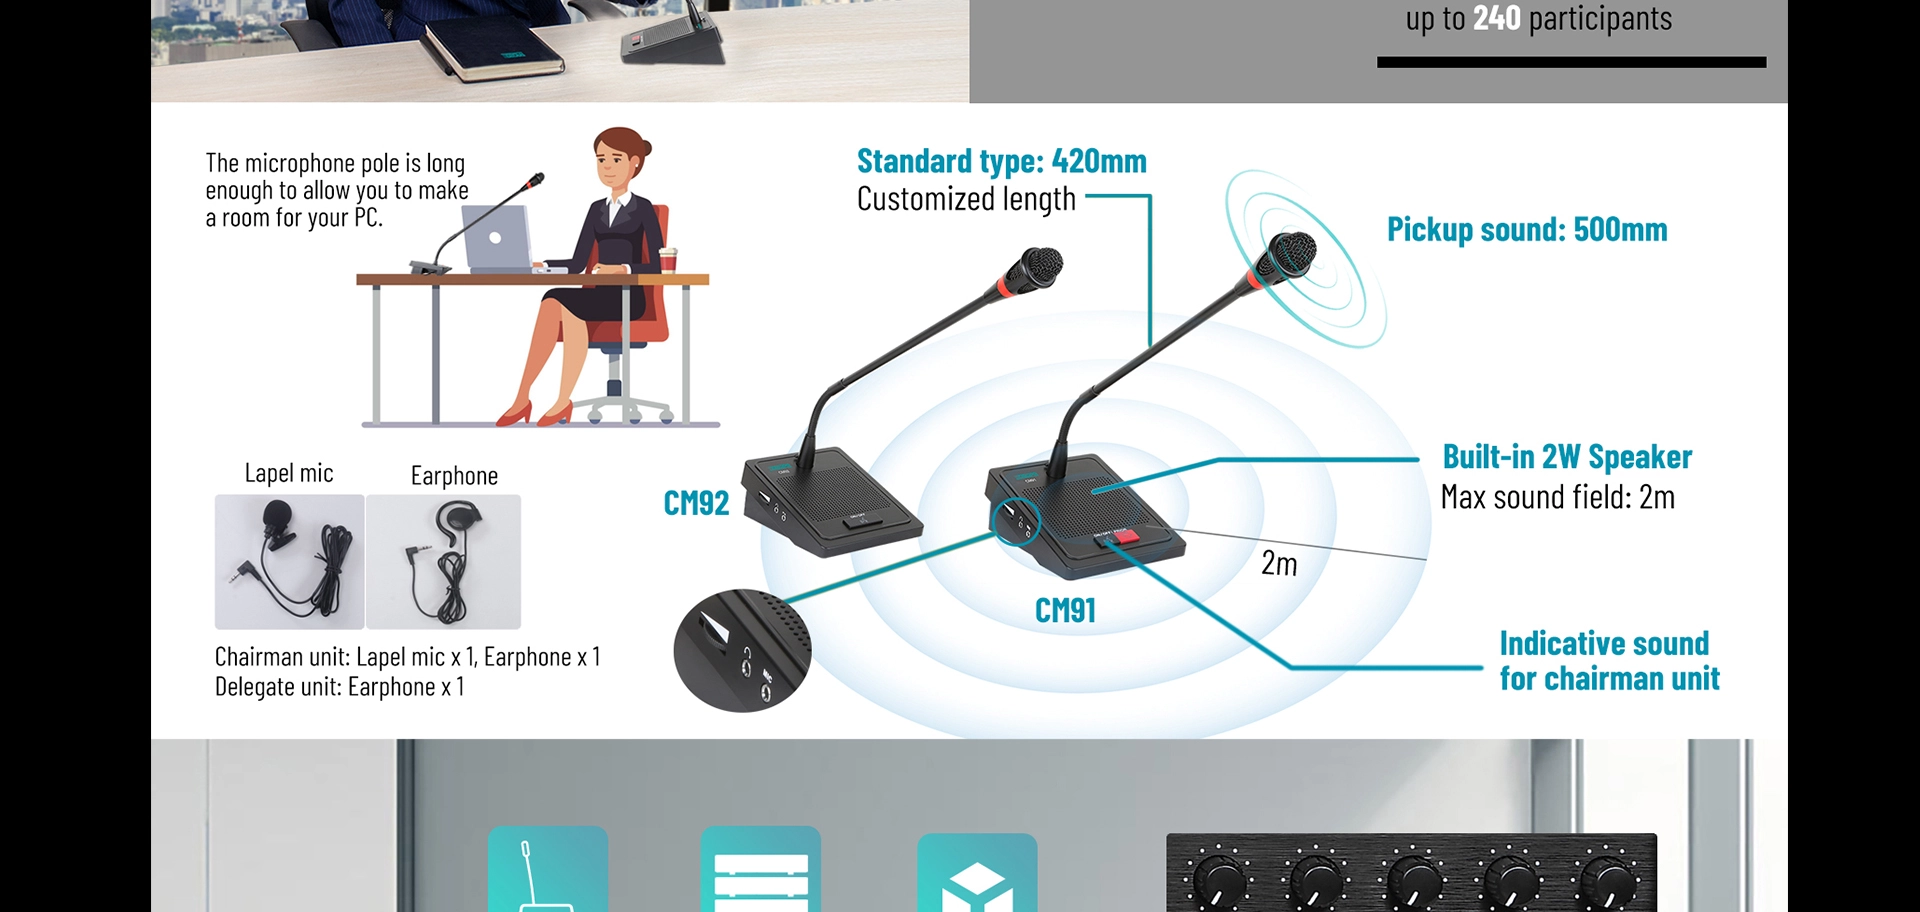 Digital Conference System Chairman Microphone with built-in speaker